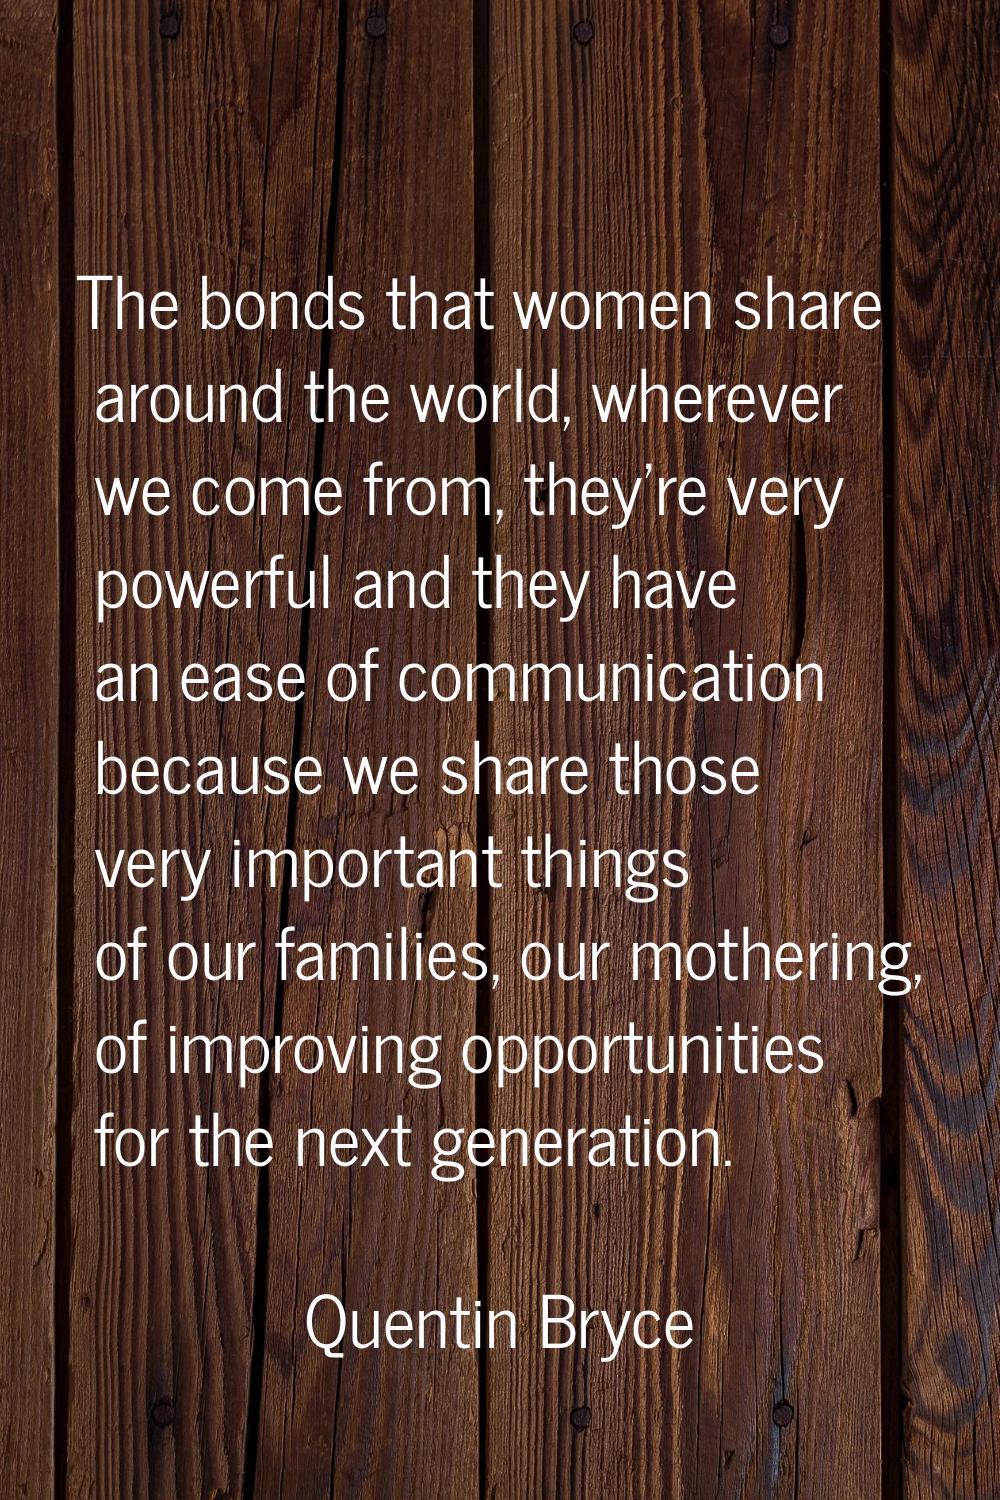 The bonds that women share around the world, wherever we come from, they're very powerful and they 